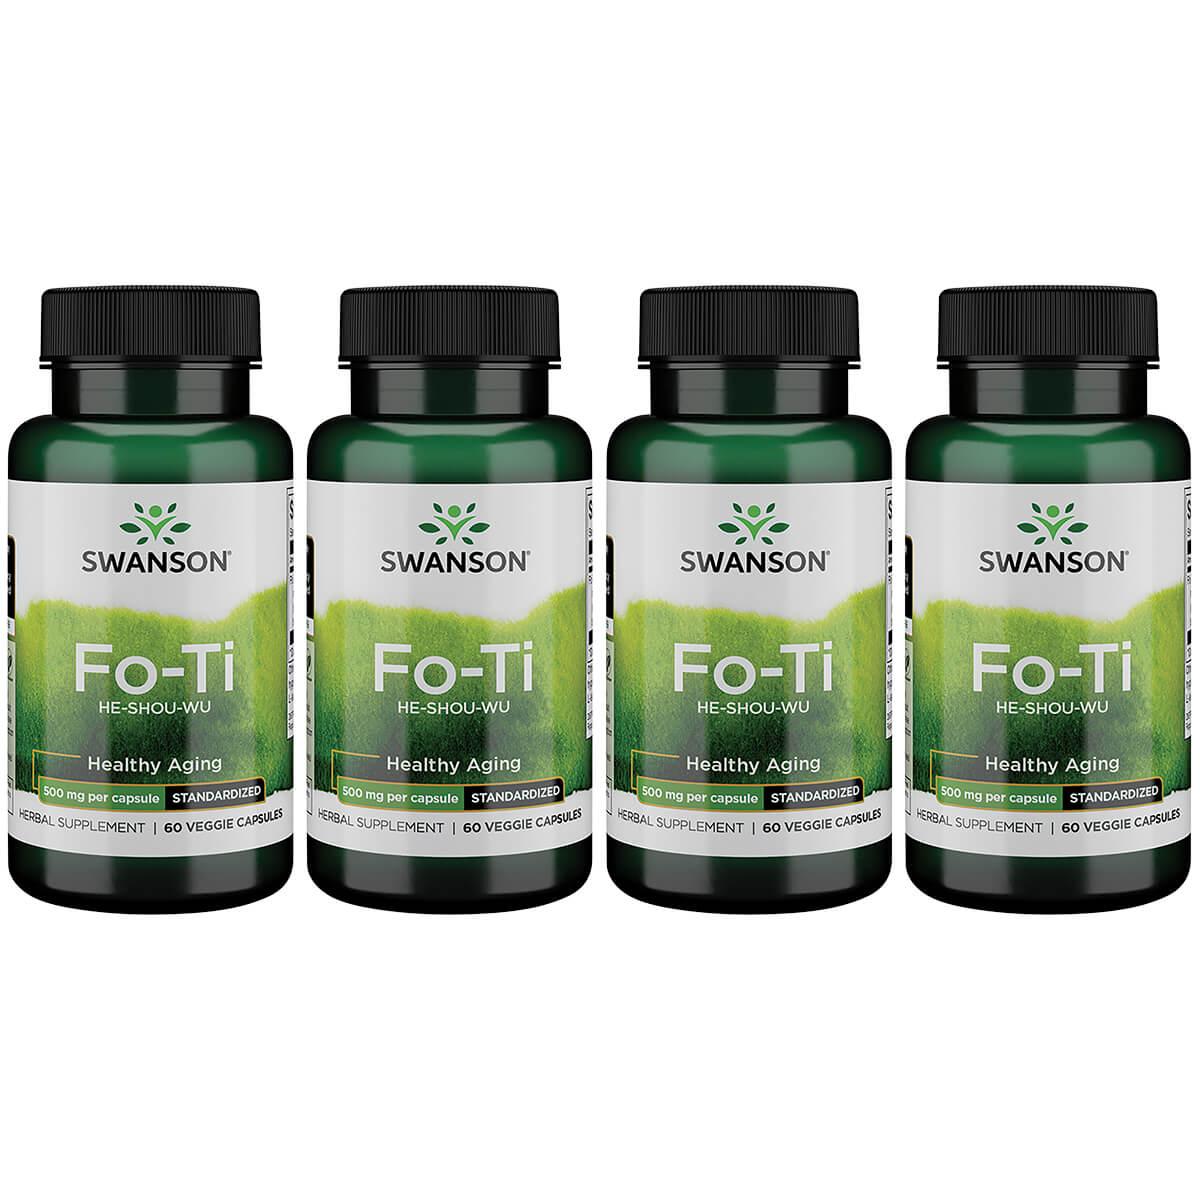 Swanson Superior Herbs Fo-Ti Extract He-Shou-Wu 4 Pack Vitamin 500 mg 60 Veg Caps Herbs and Supplements